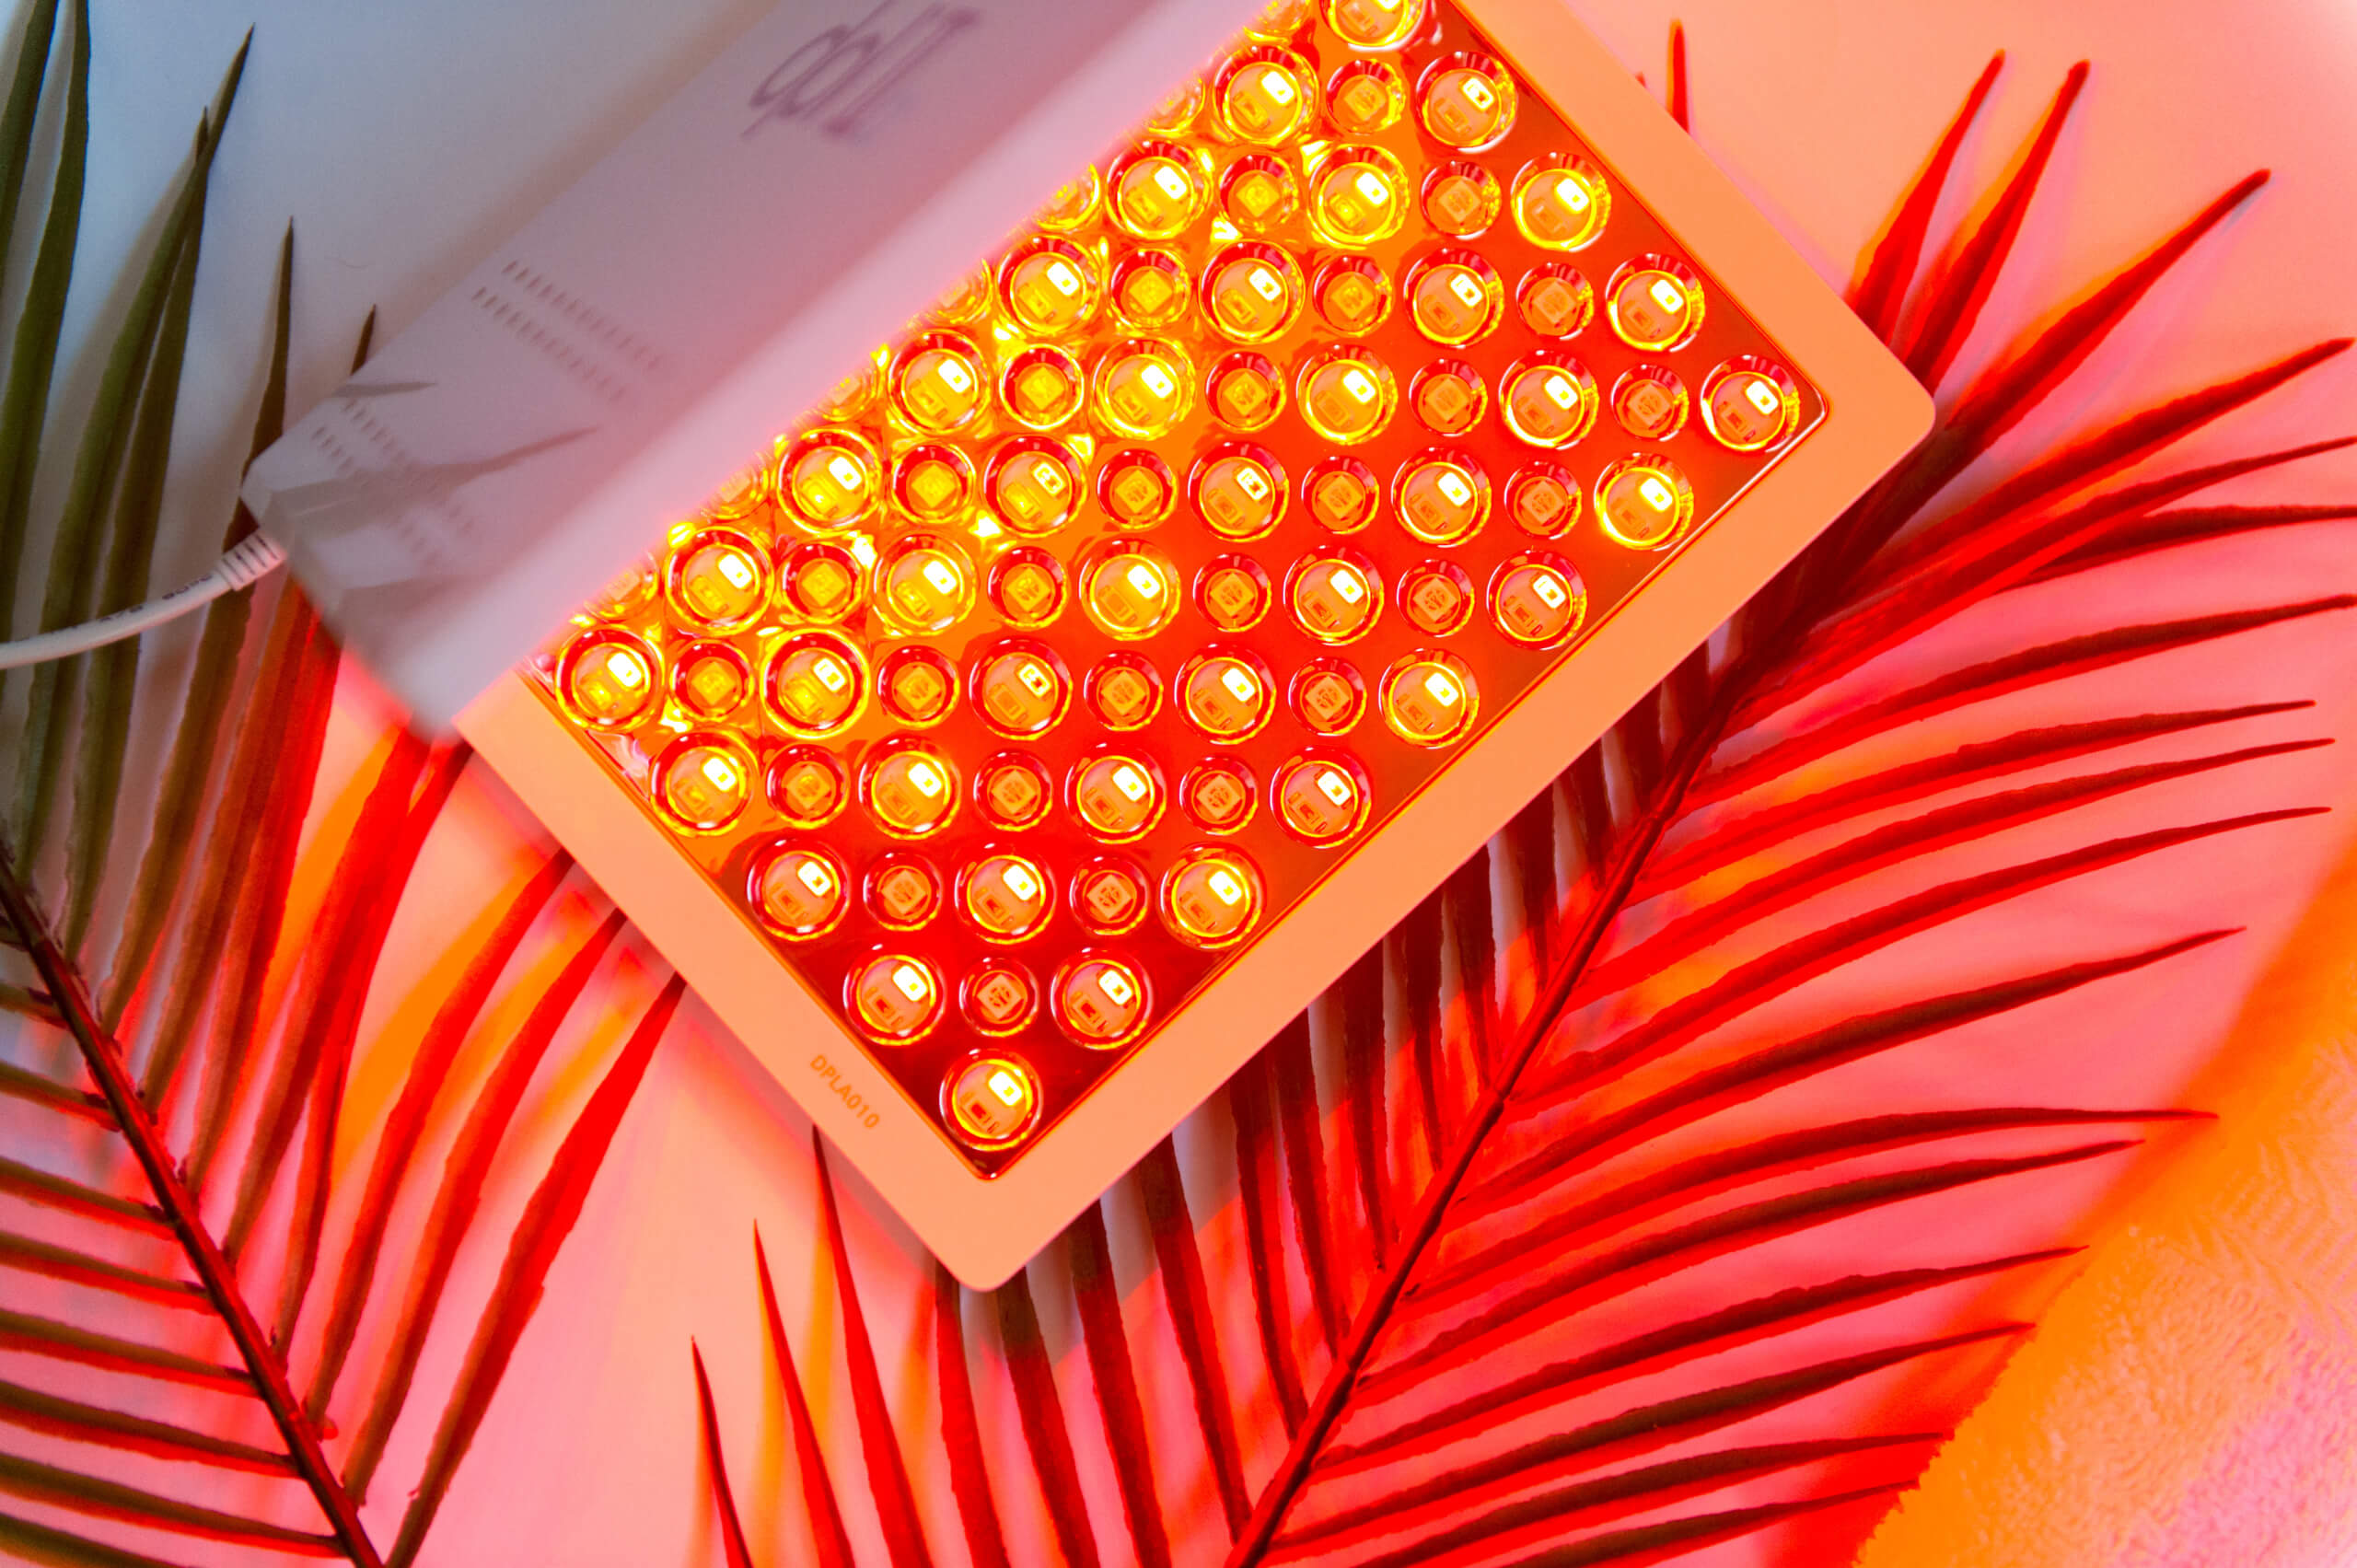 Possible Risks of Red Light Therapy